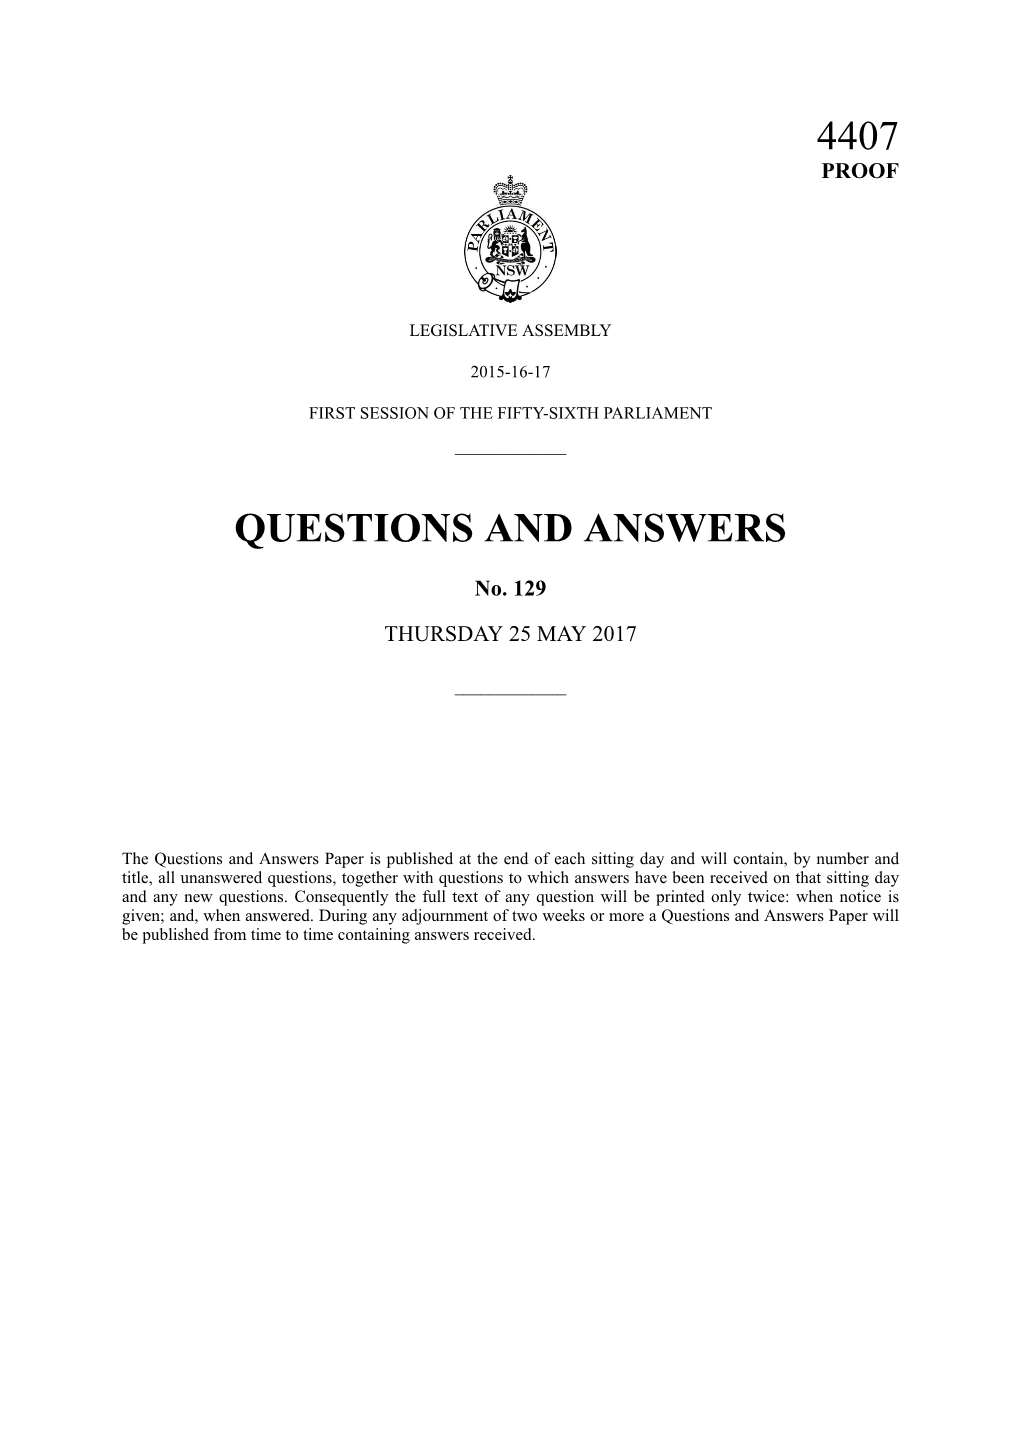 Questions and Answers 4407